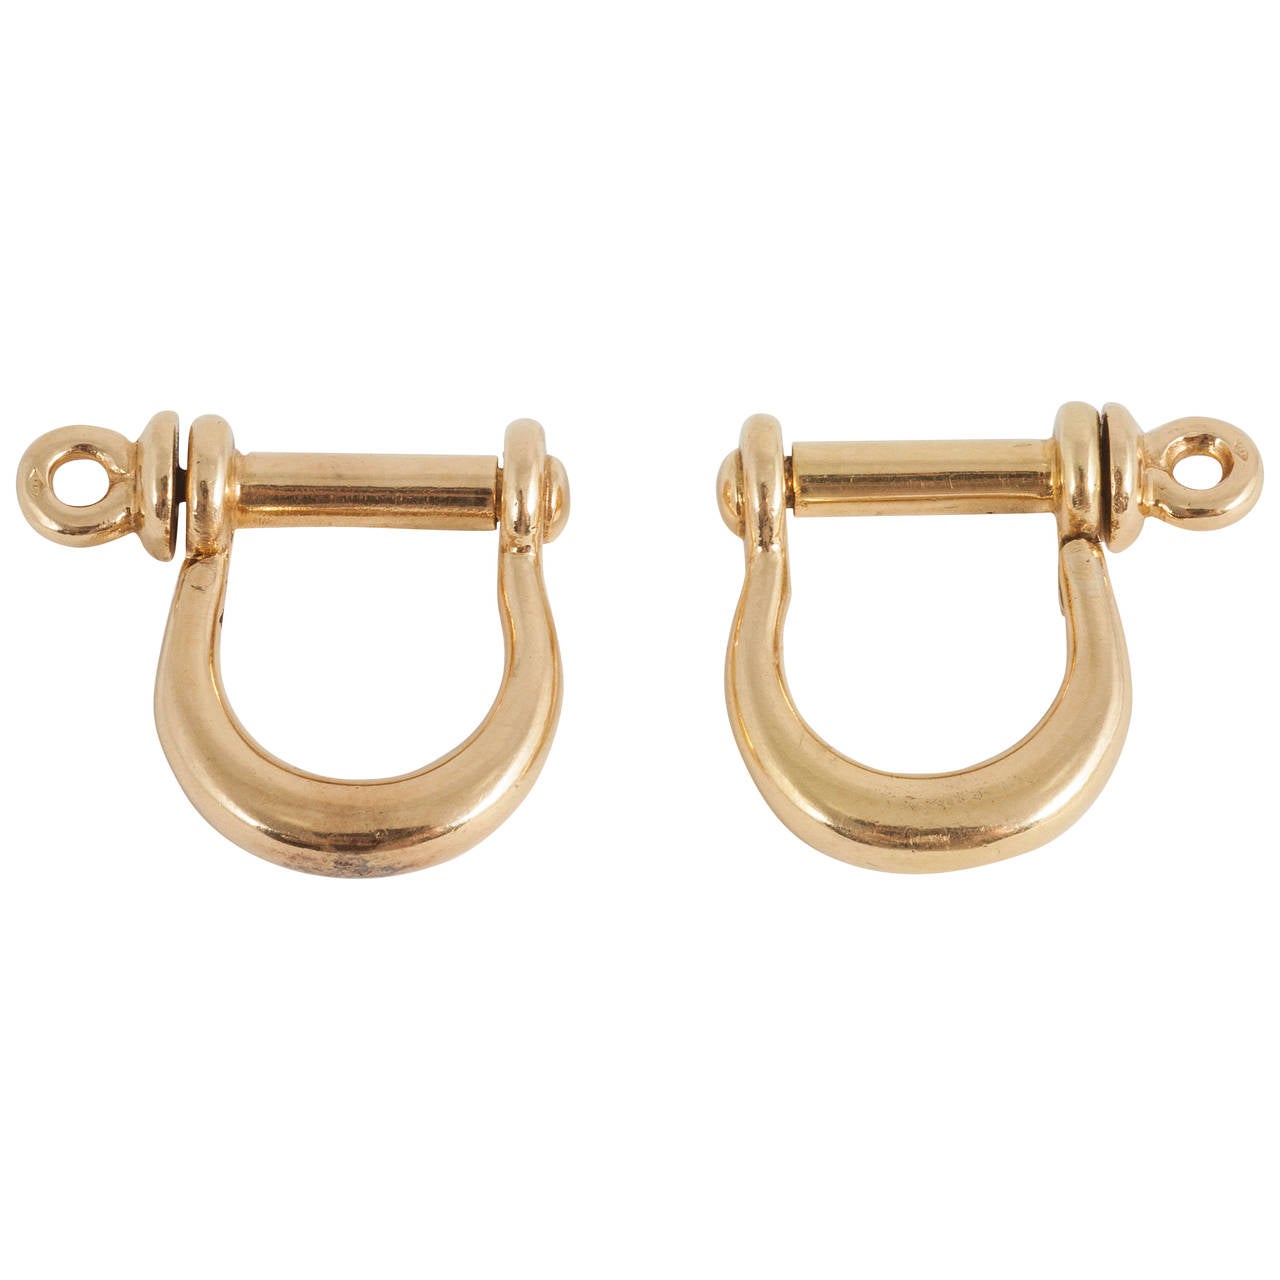 French 1960 gold boating shackle cufflinks